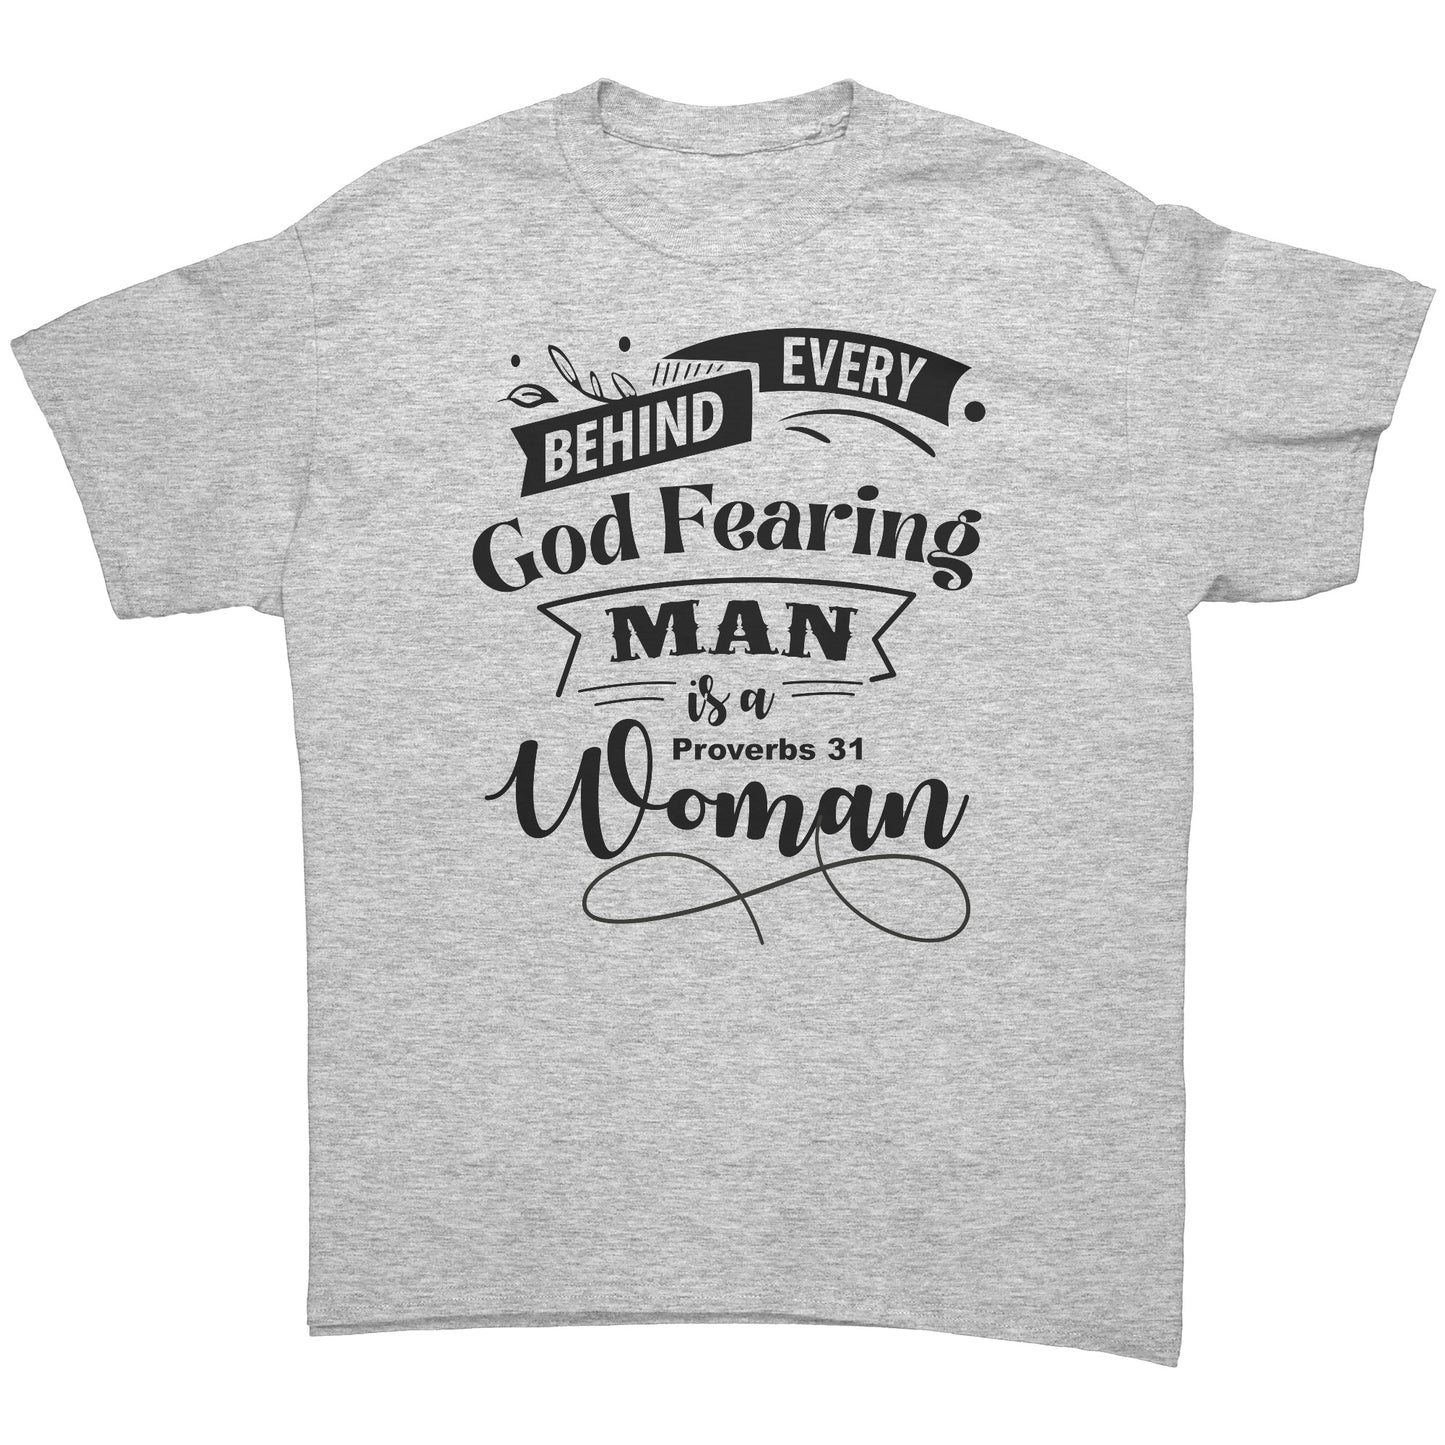 Behind Every God Fearing Man Is A Proverbs 31 Woman Men's T-Shirt Part 1